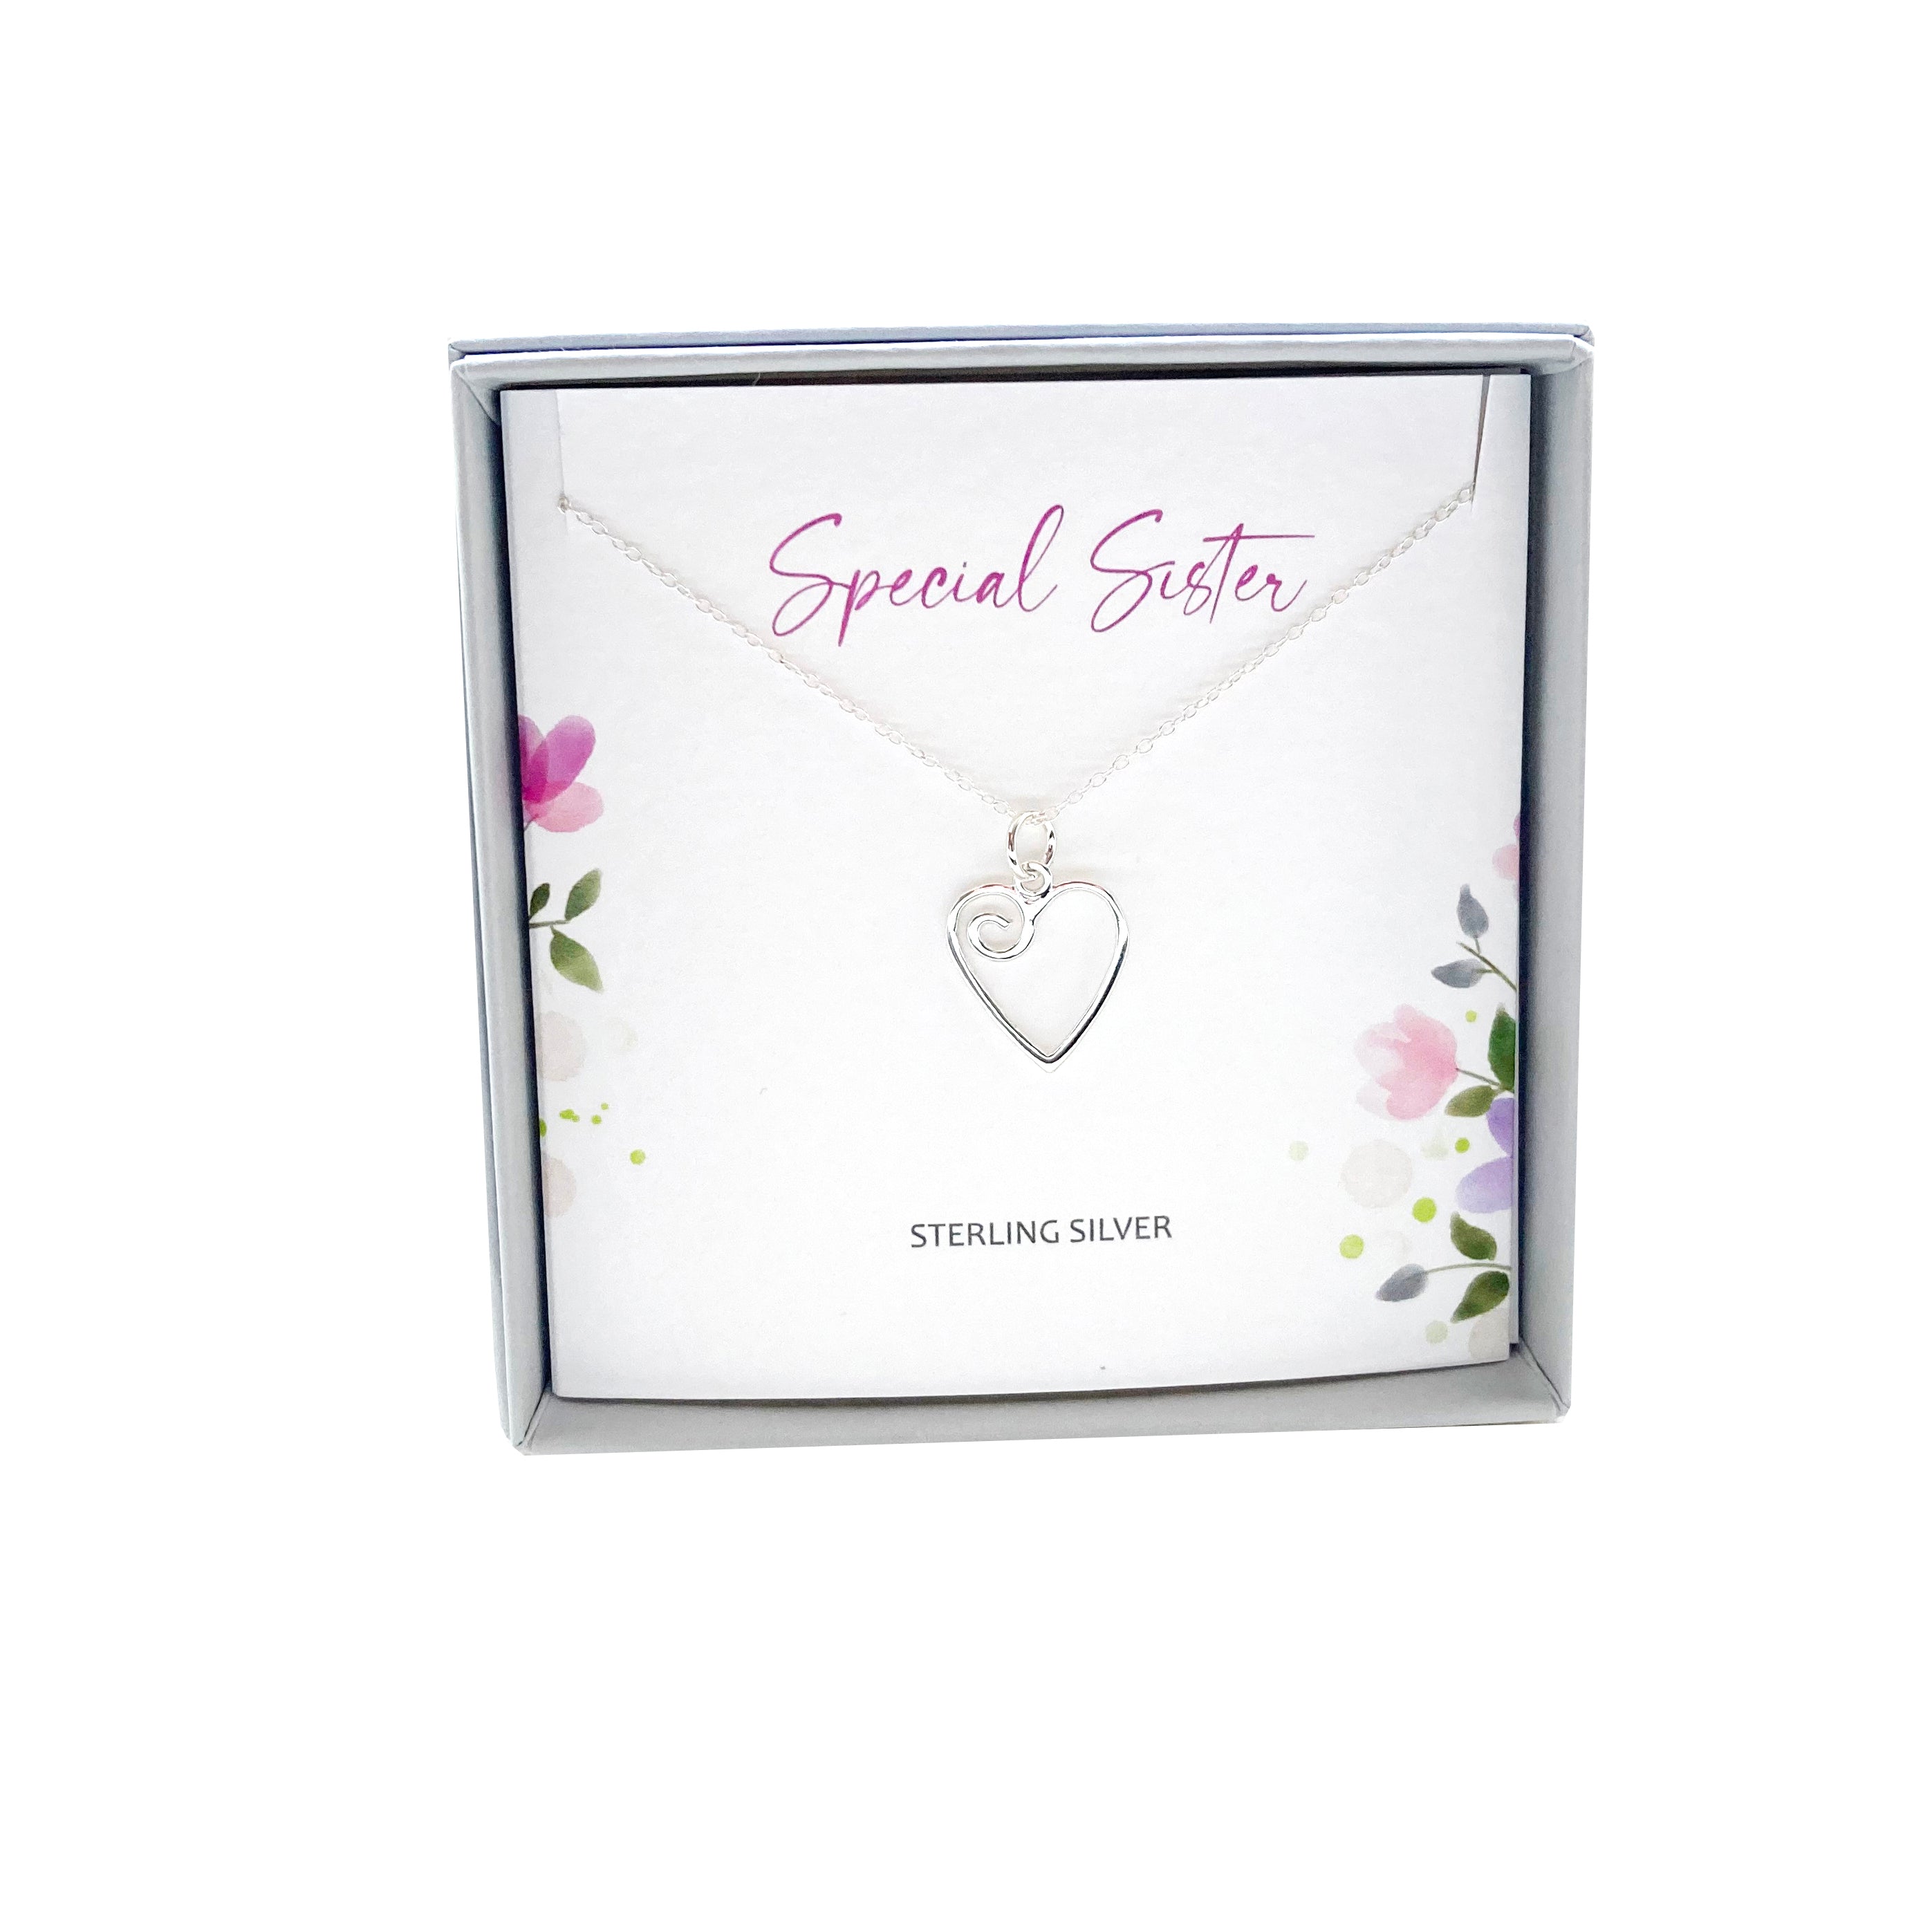 Silver Studio Wishes - Special Sister pendant